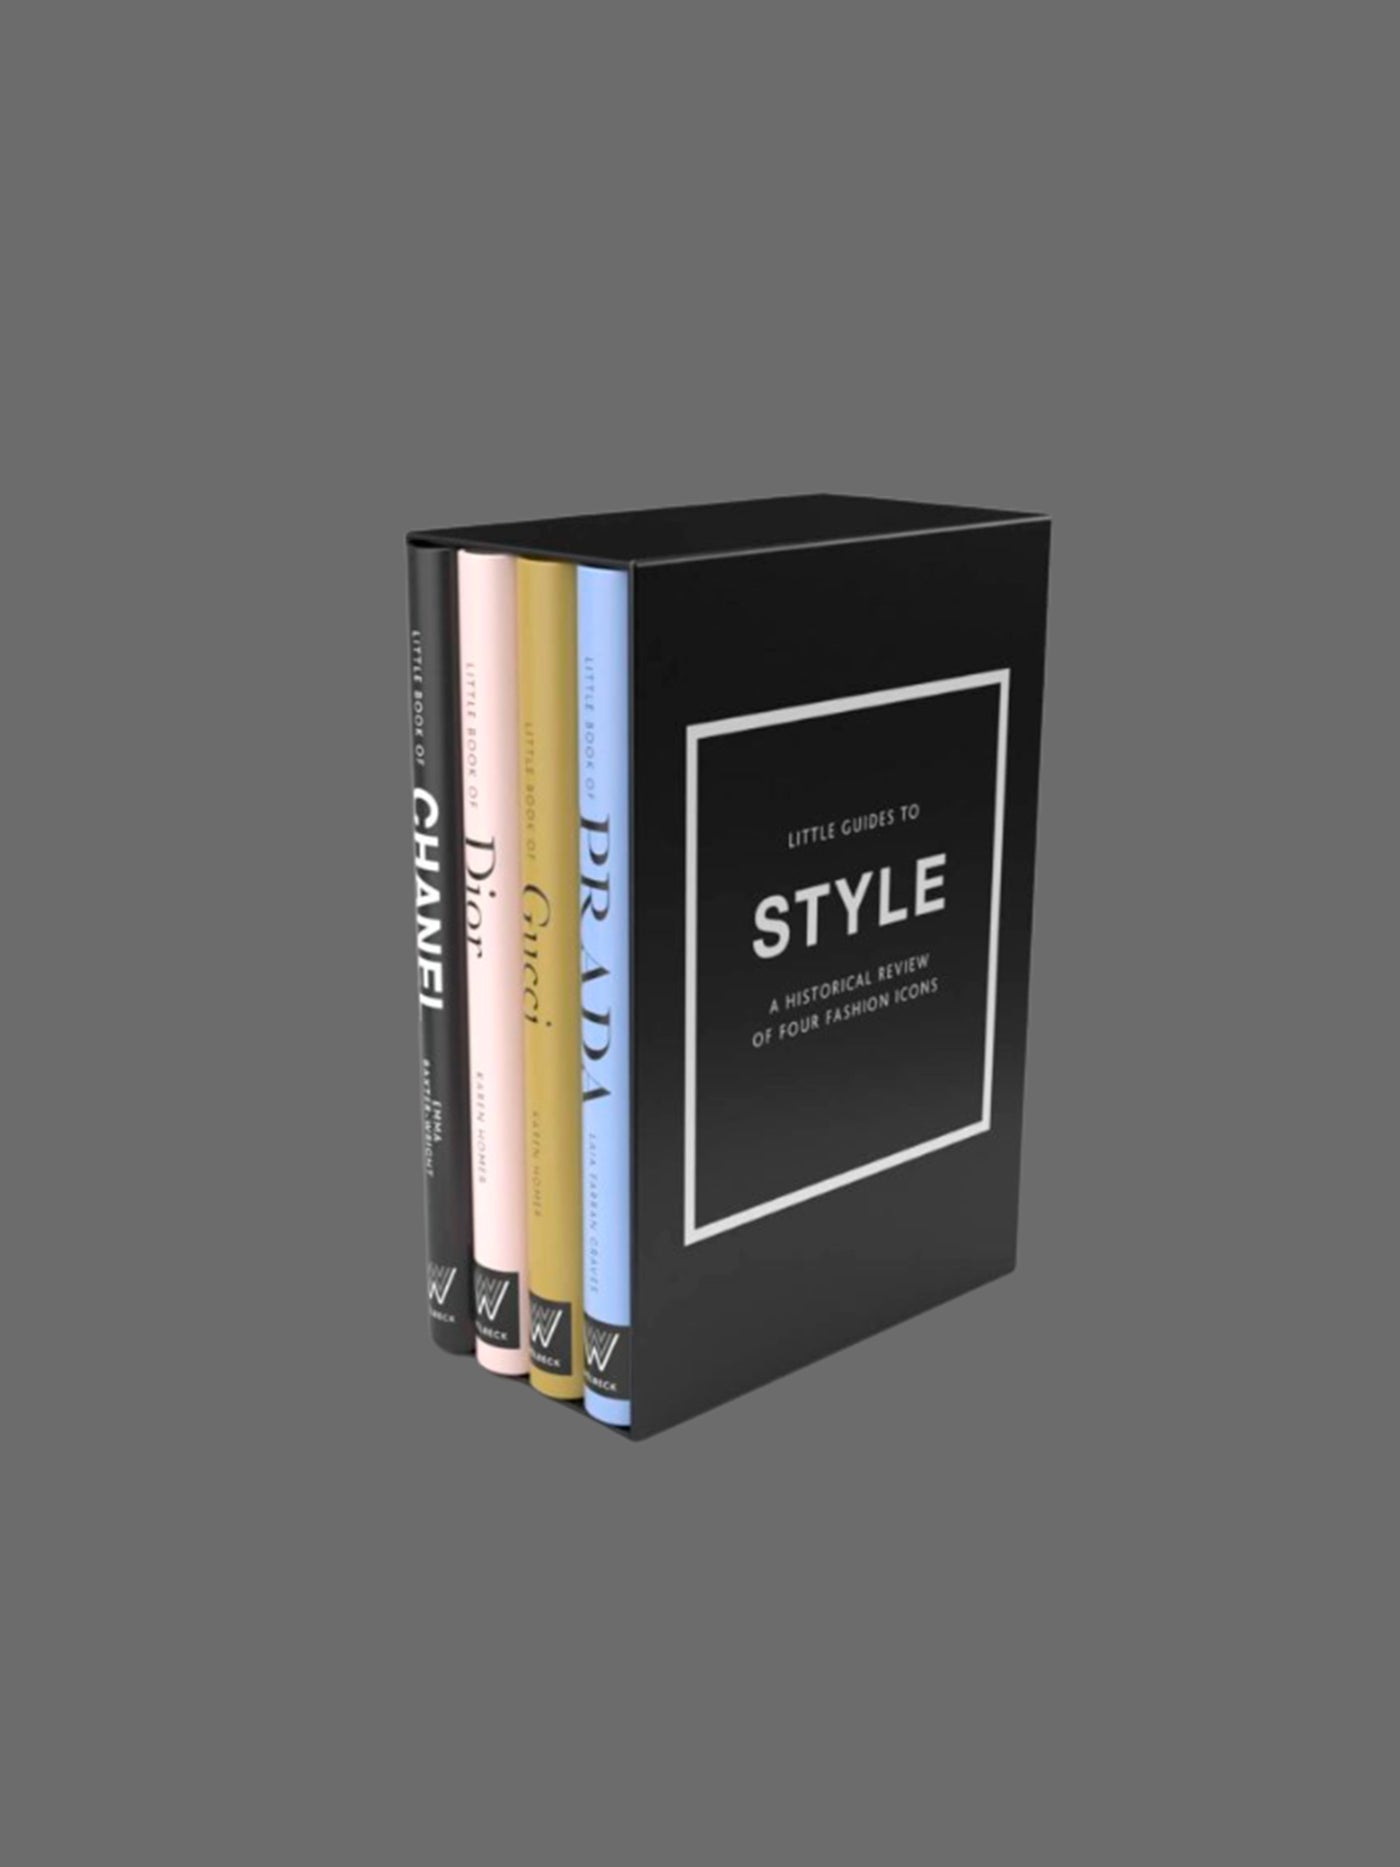 Little Guides To Style